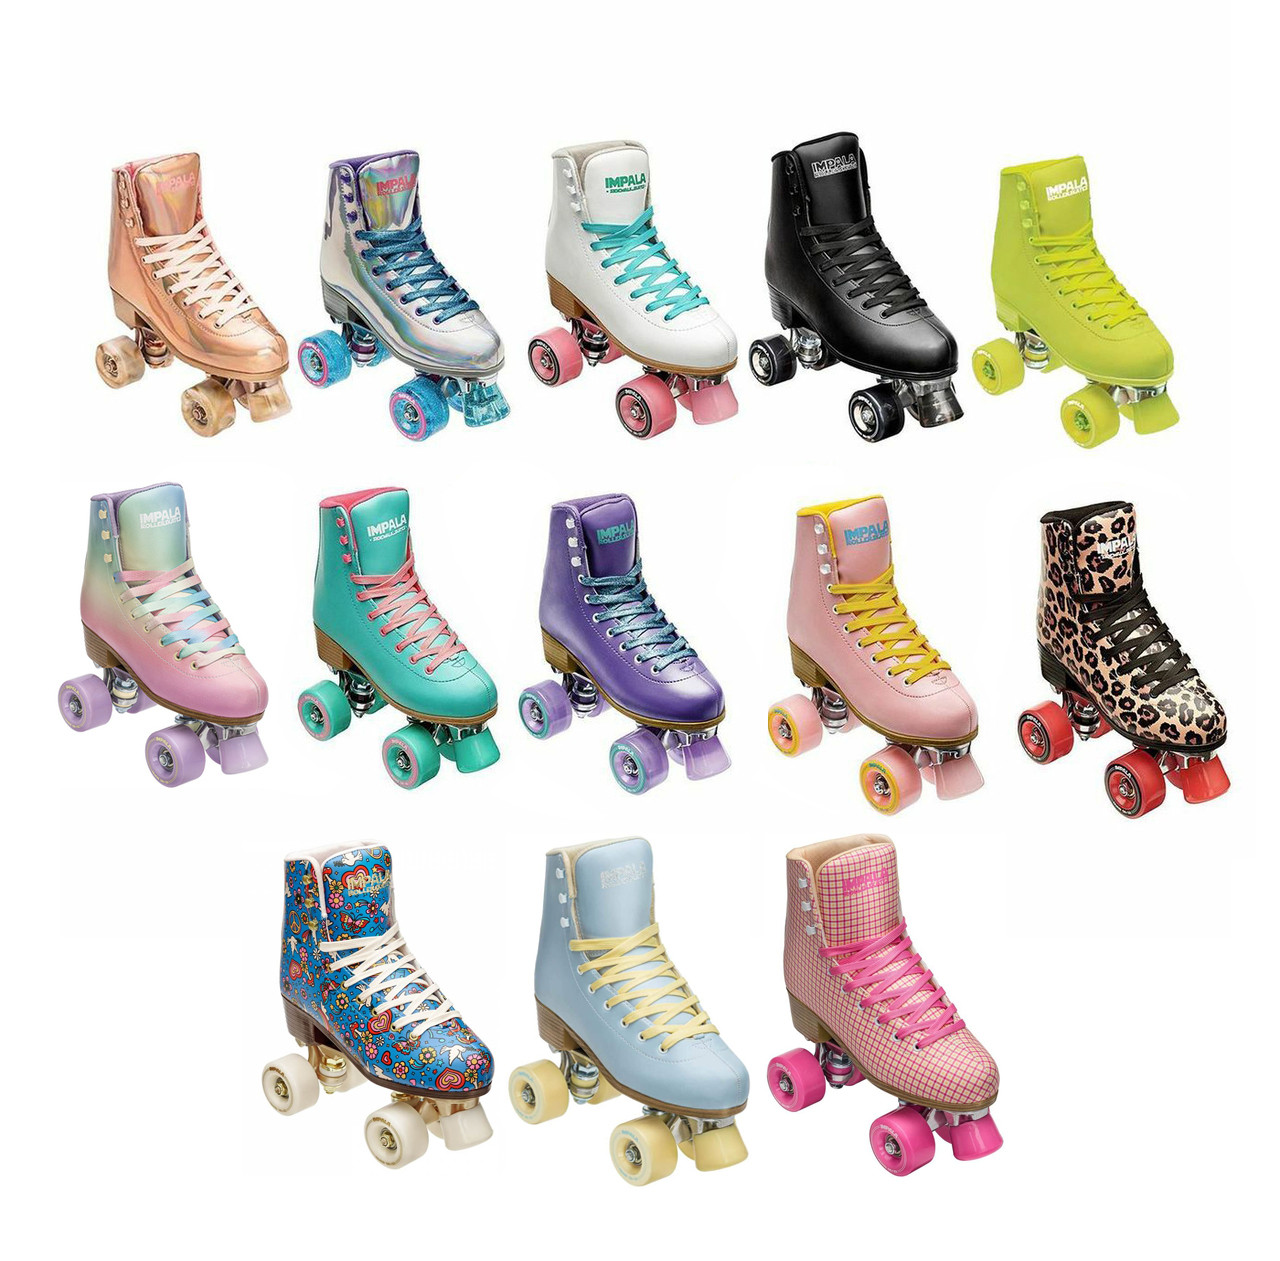 Riedell Volt Quad Derby Speed Roller Skate w/Pink Laces 